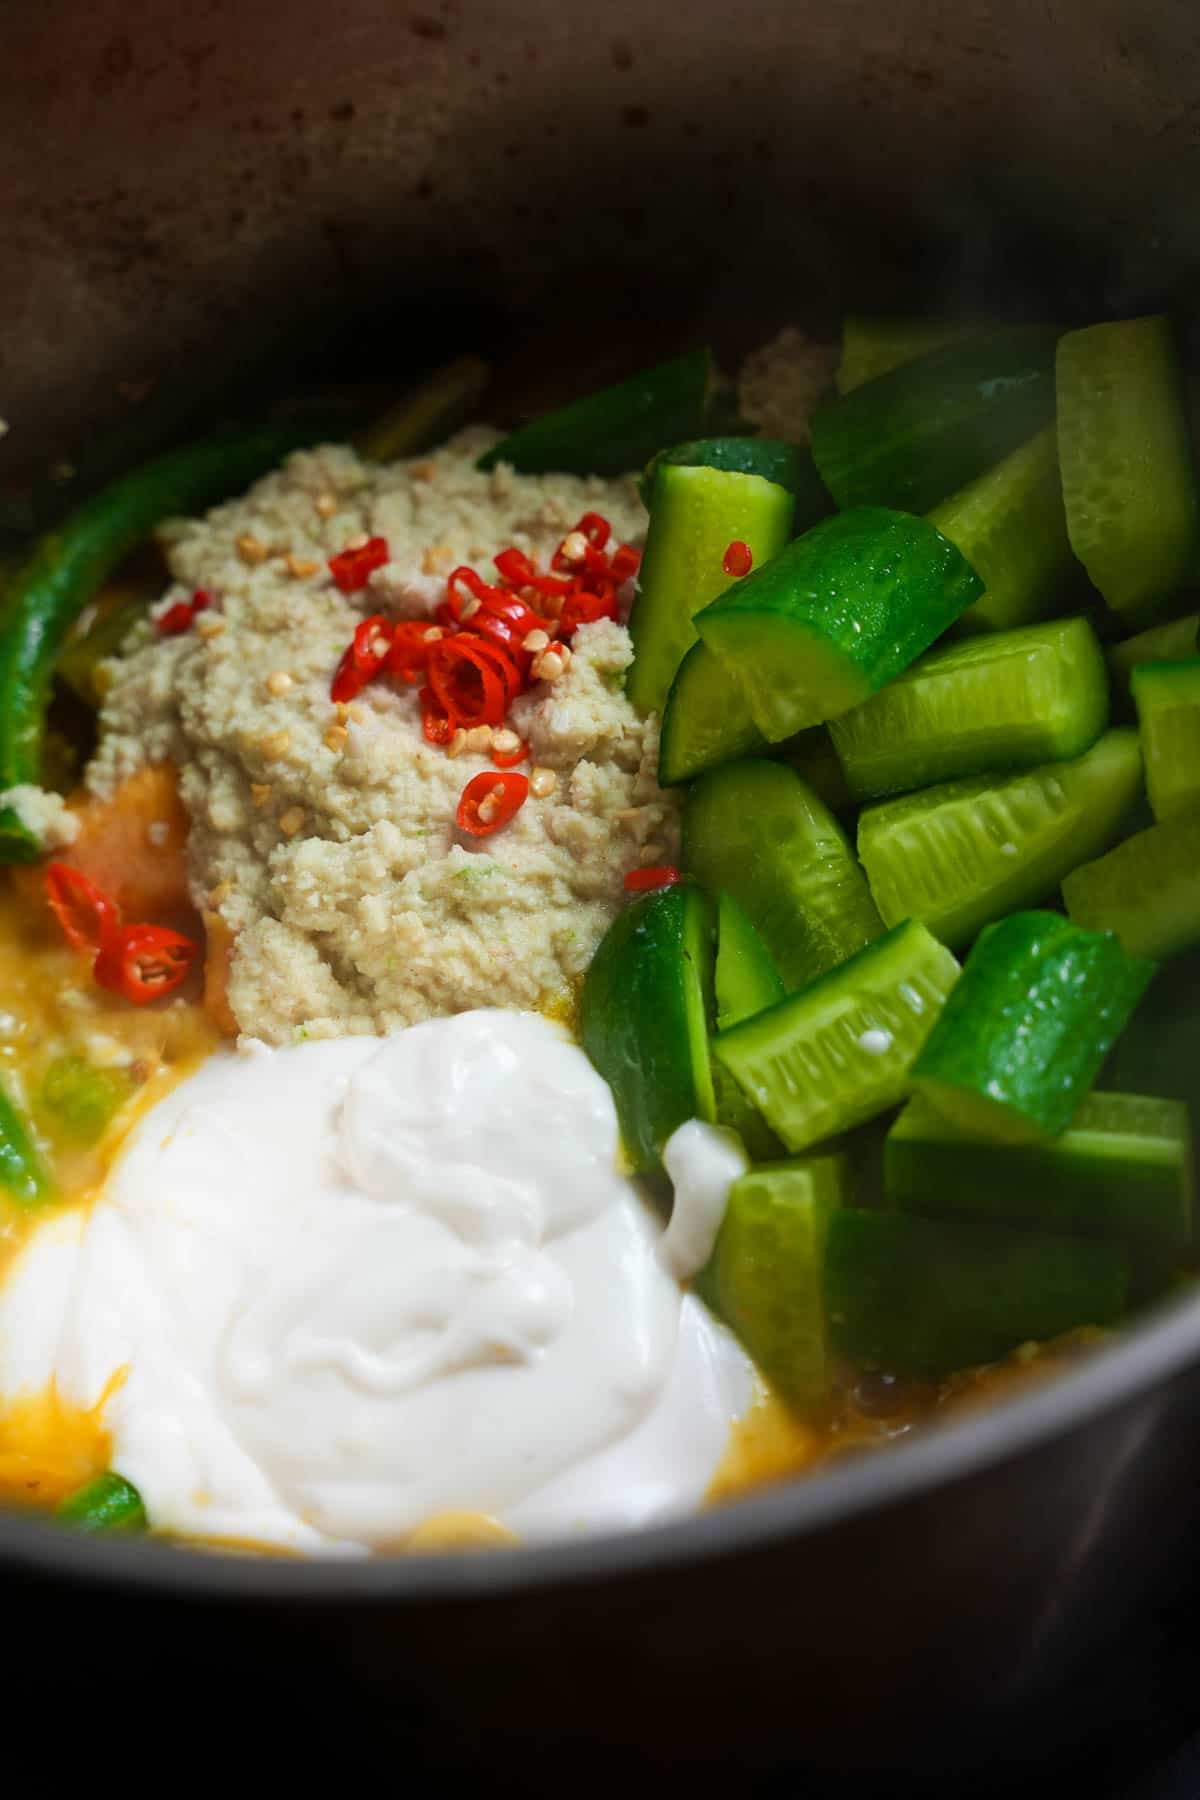 CHilies, the ground coconut mixture, yogurt, and cucumbers are added to the pot.